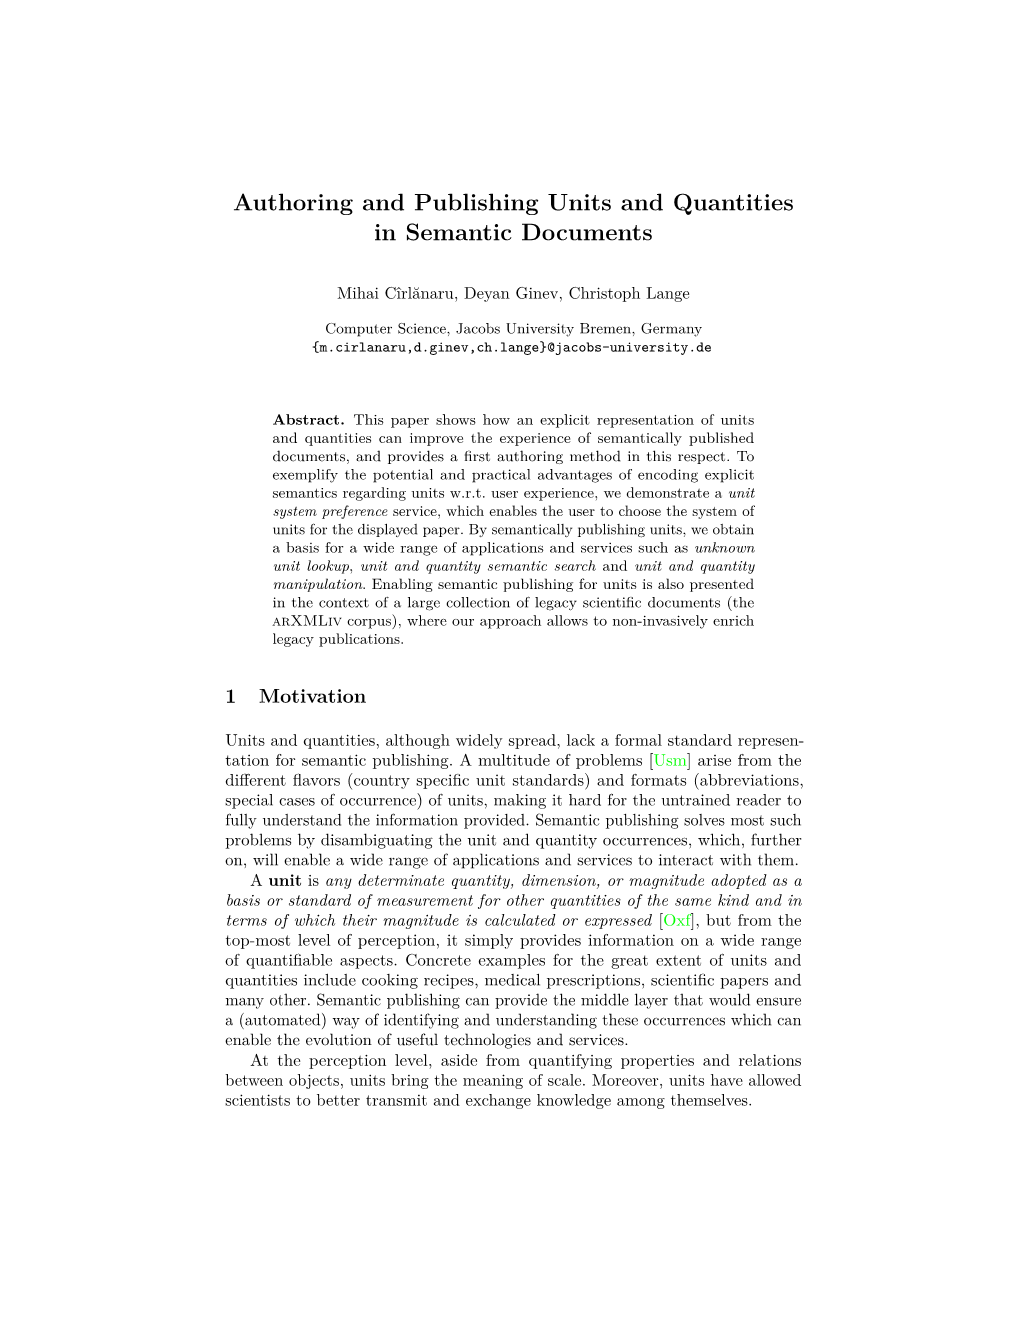 Authoring and Publishing of Units and Quantities in Semantic Documents